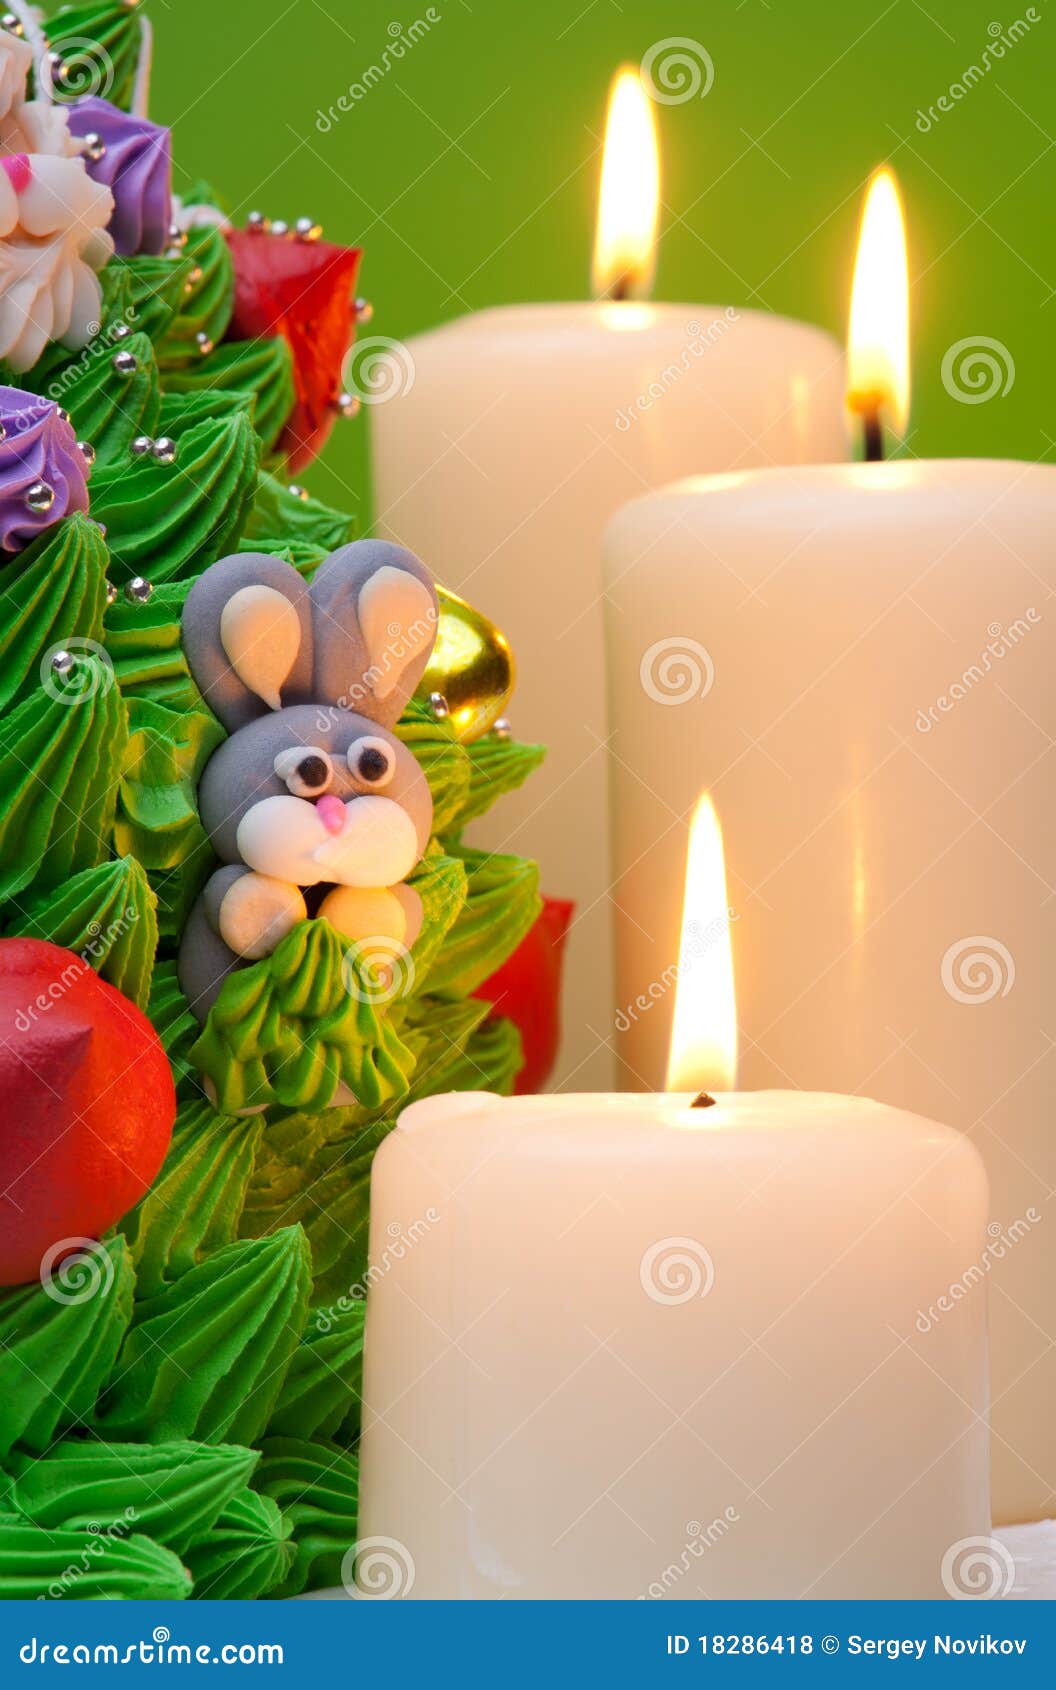 Chocolate Cake and Candles on Christmas Decorated Table  Free Stock Photo